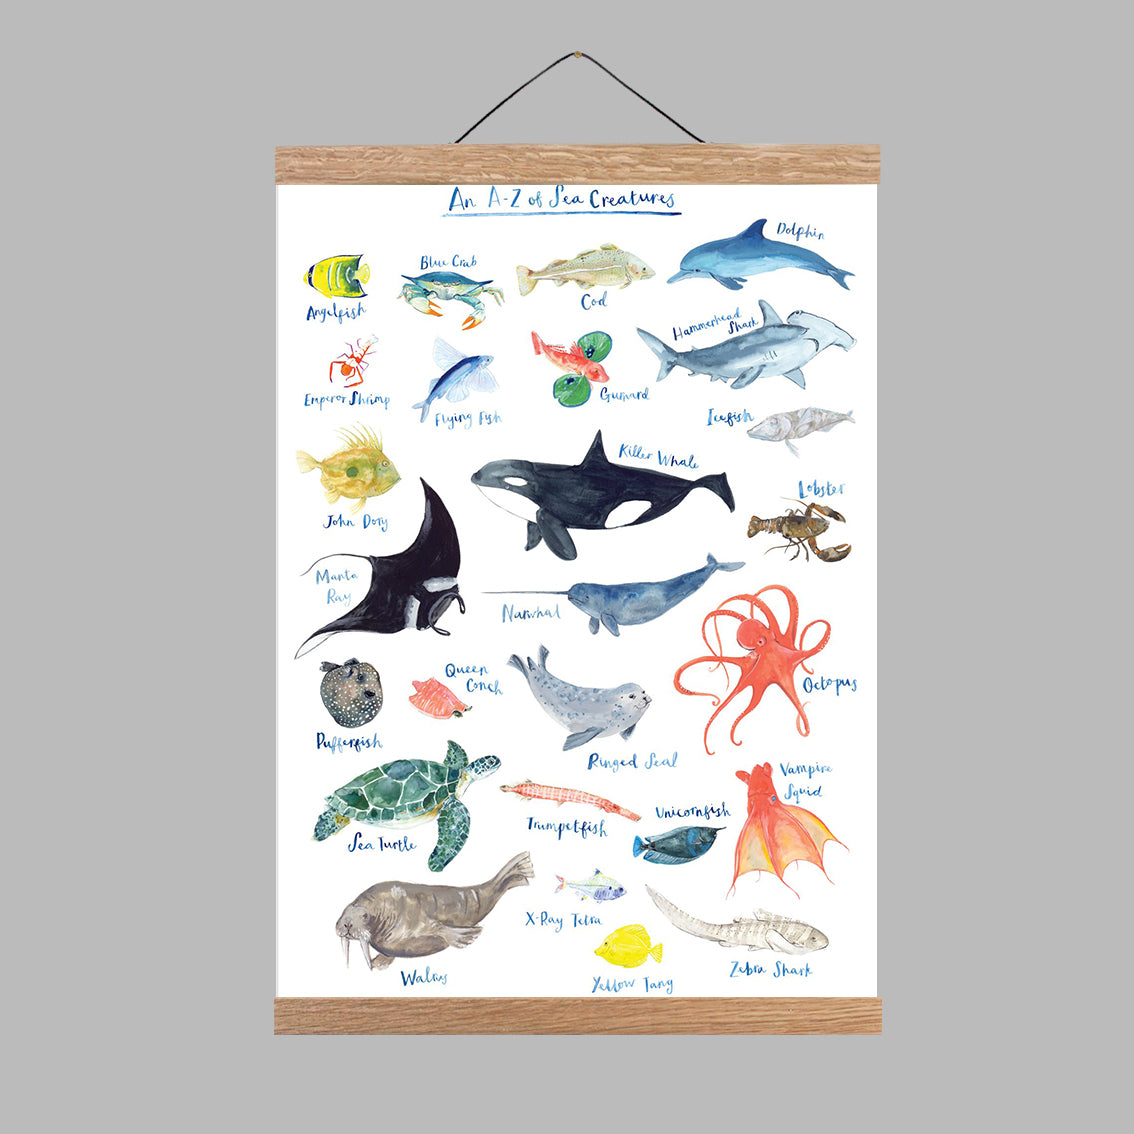 A3 A to Z of Sea Creatures Art Print